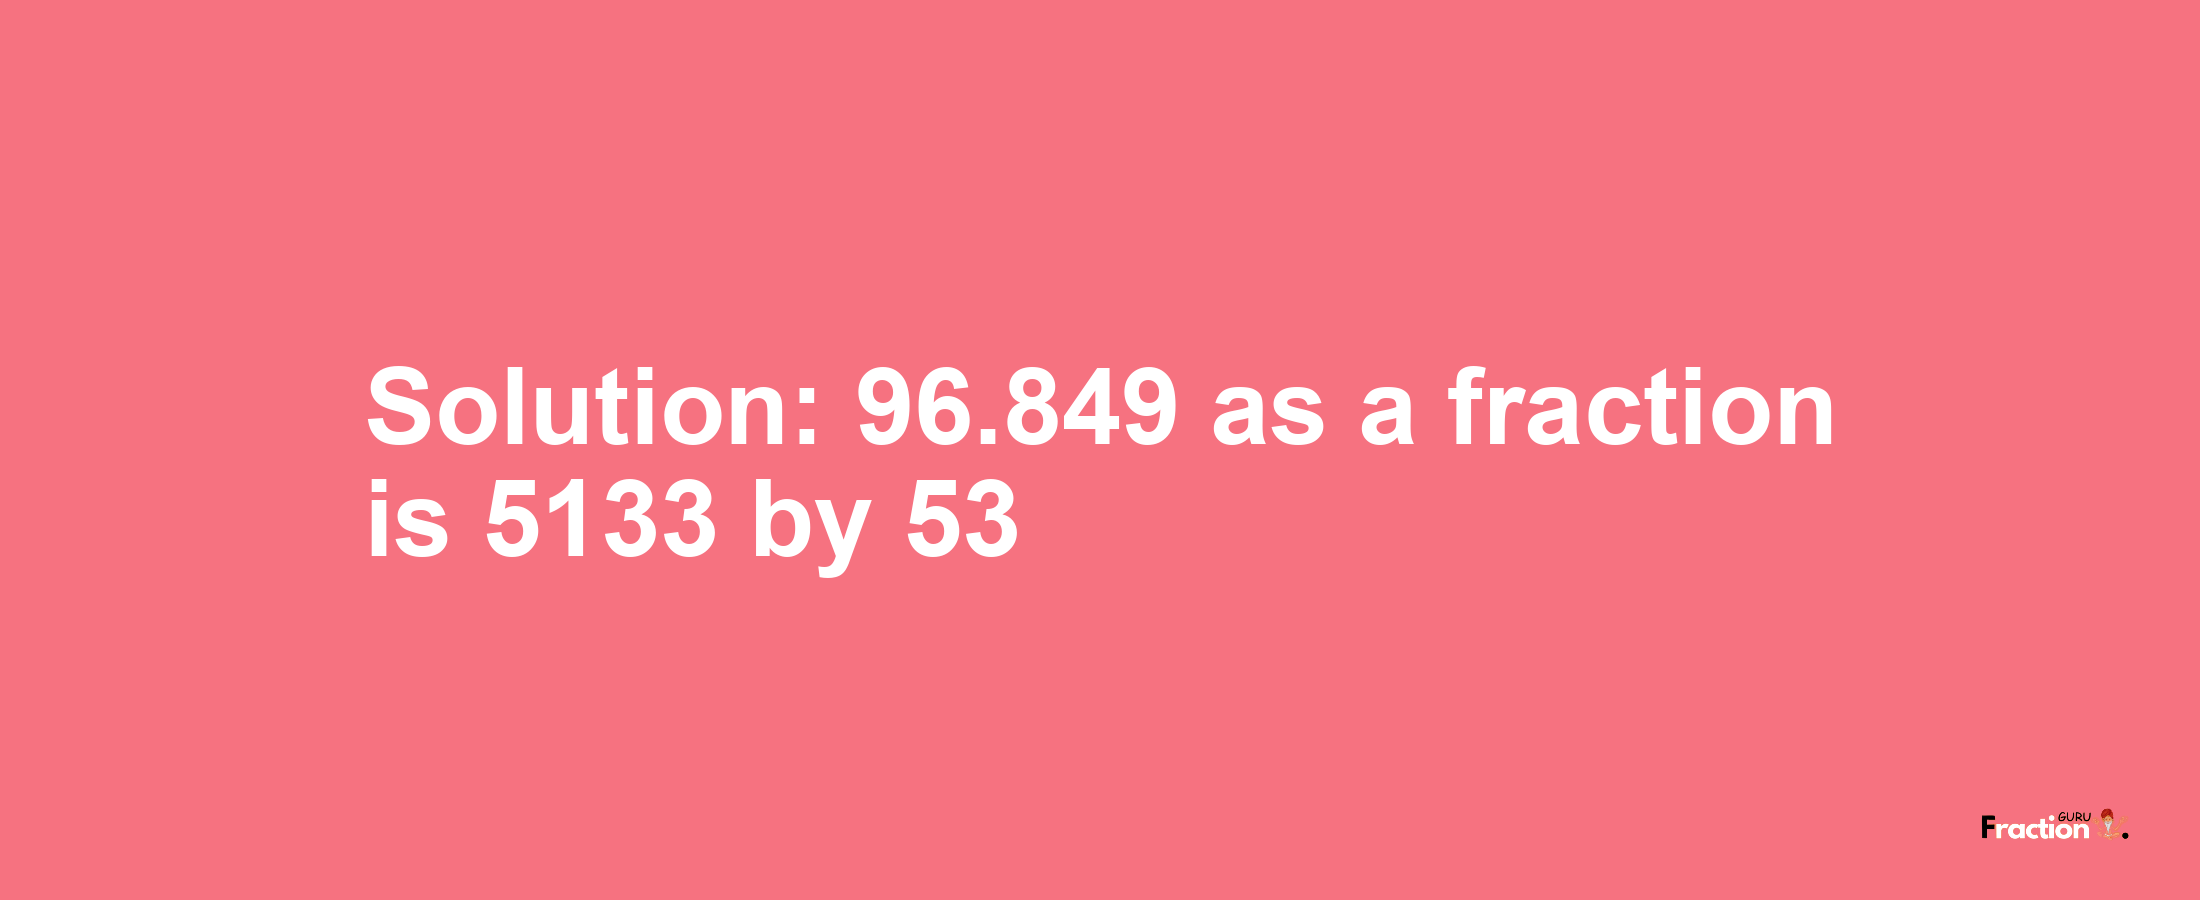 Solution:96.849 as a fraction is 5133/53